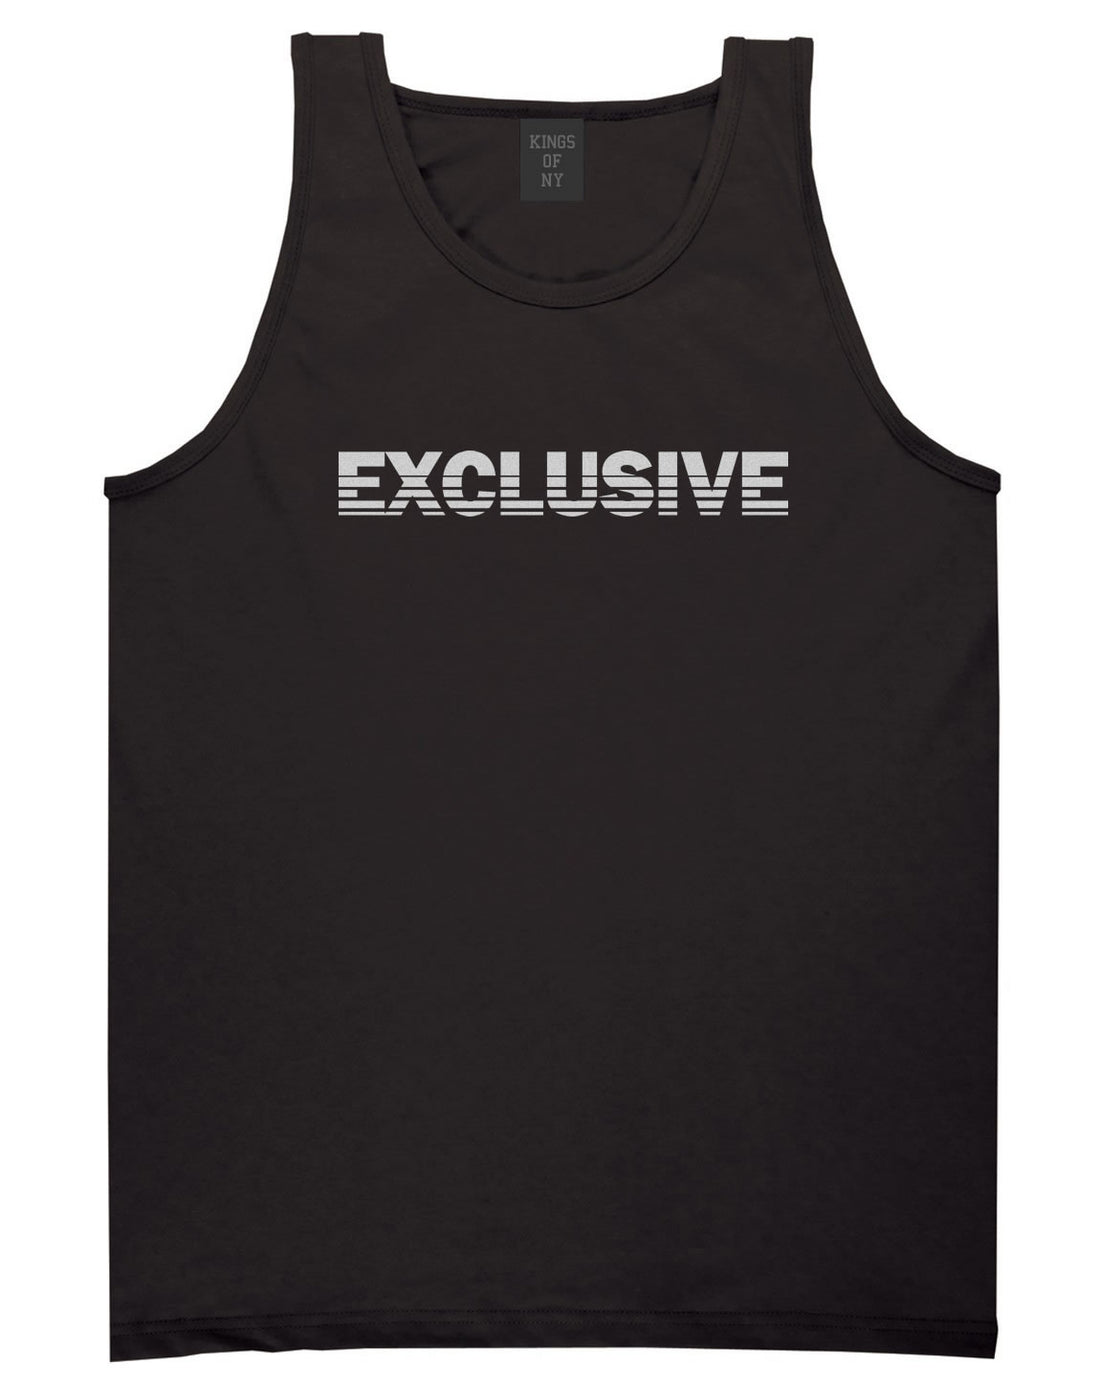 Exclusive Racing Style Tank Top in Black by Kings Of NY